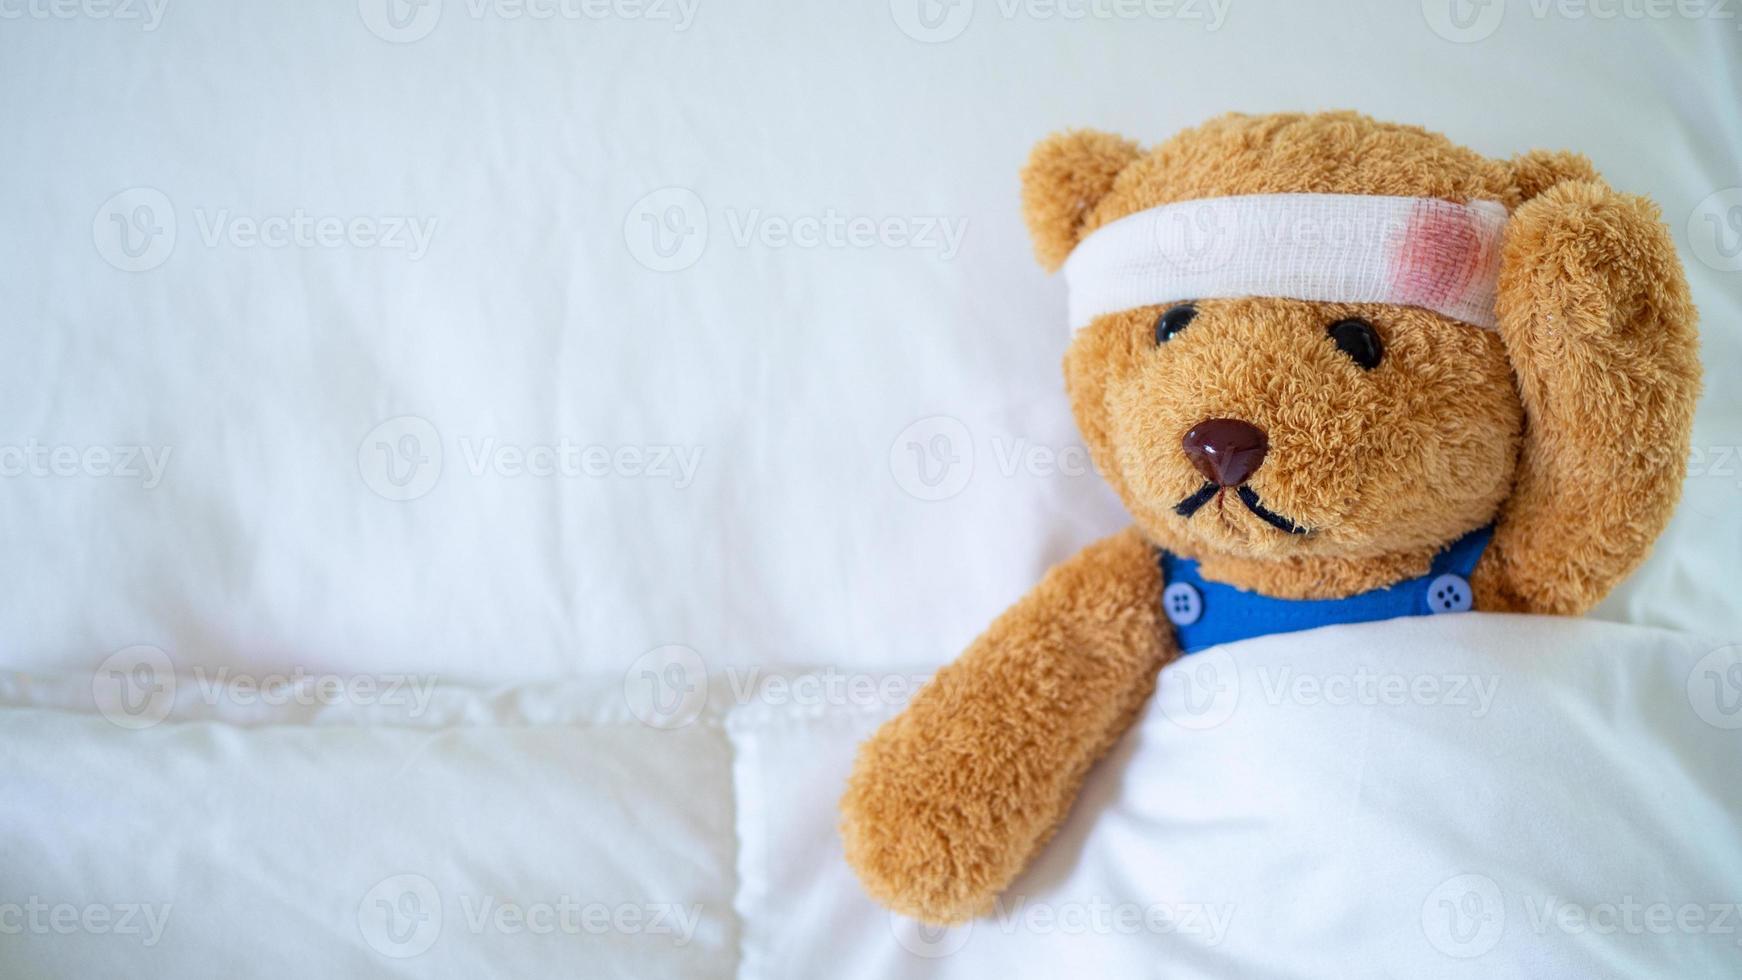 The teddy bear was sick in bed after being injured in an accident. Getting life insurance and accident insurance concept photo